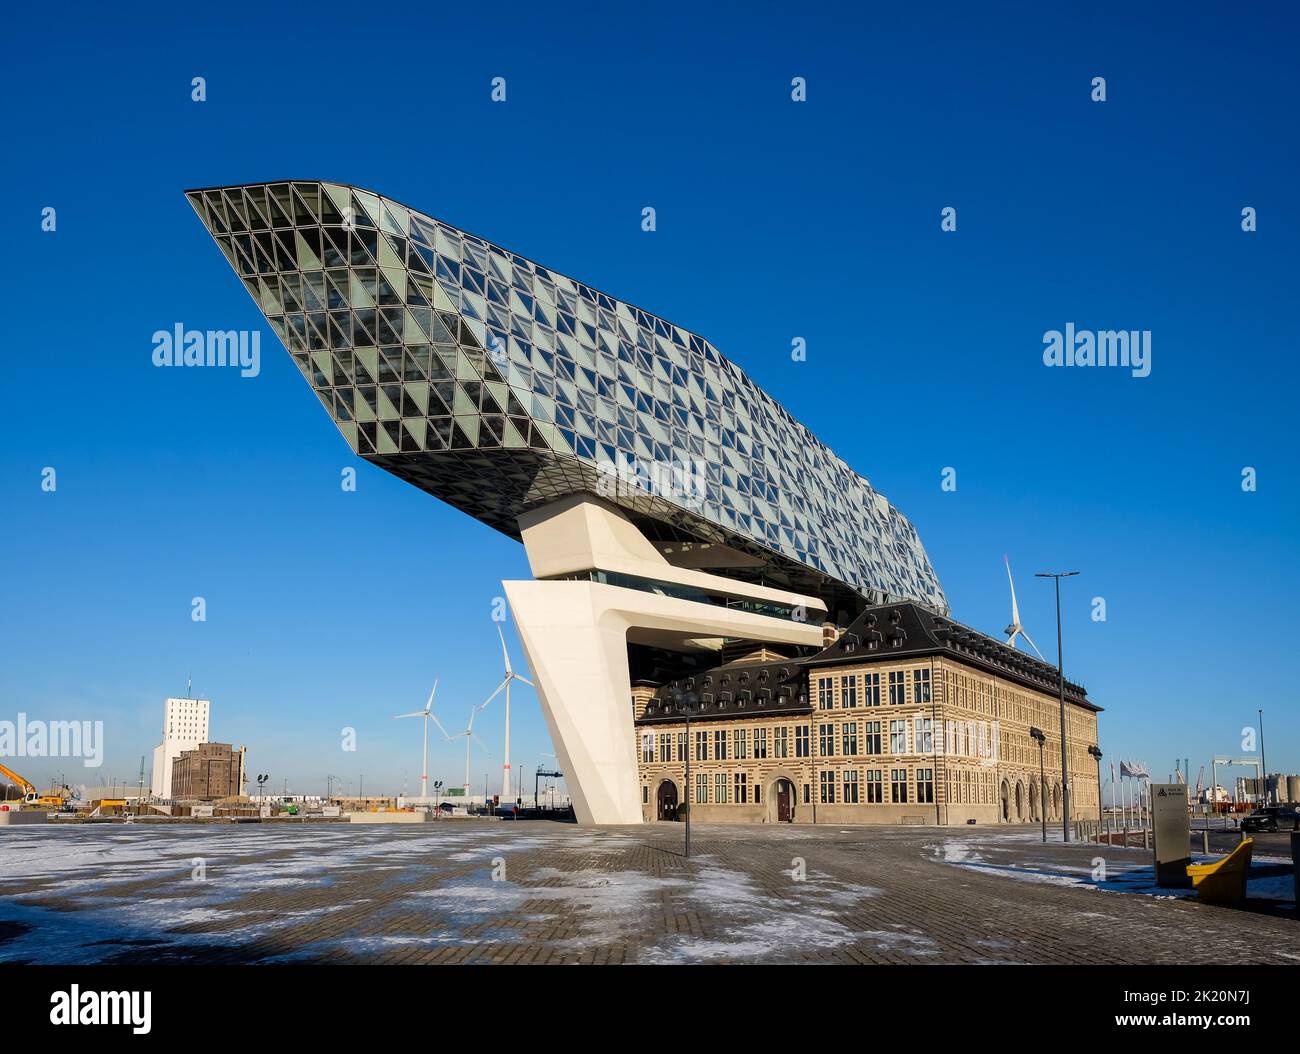 Antwerp, Belgium - 14 February 2021: the famous modern Port House building on a clear winter's day. Stock Photo